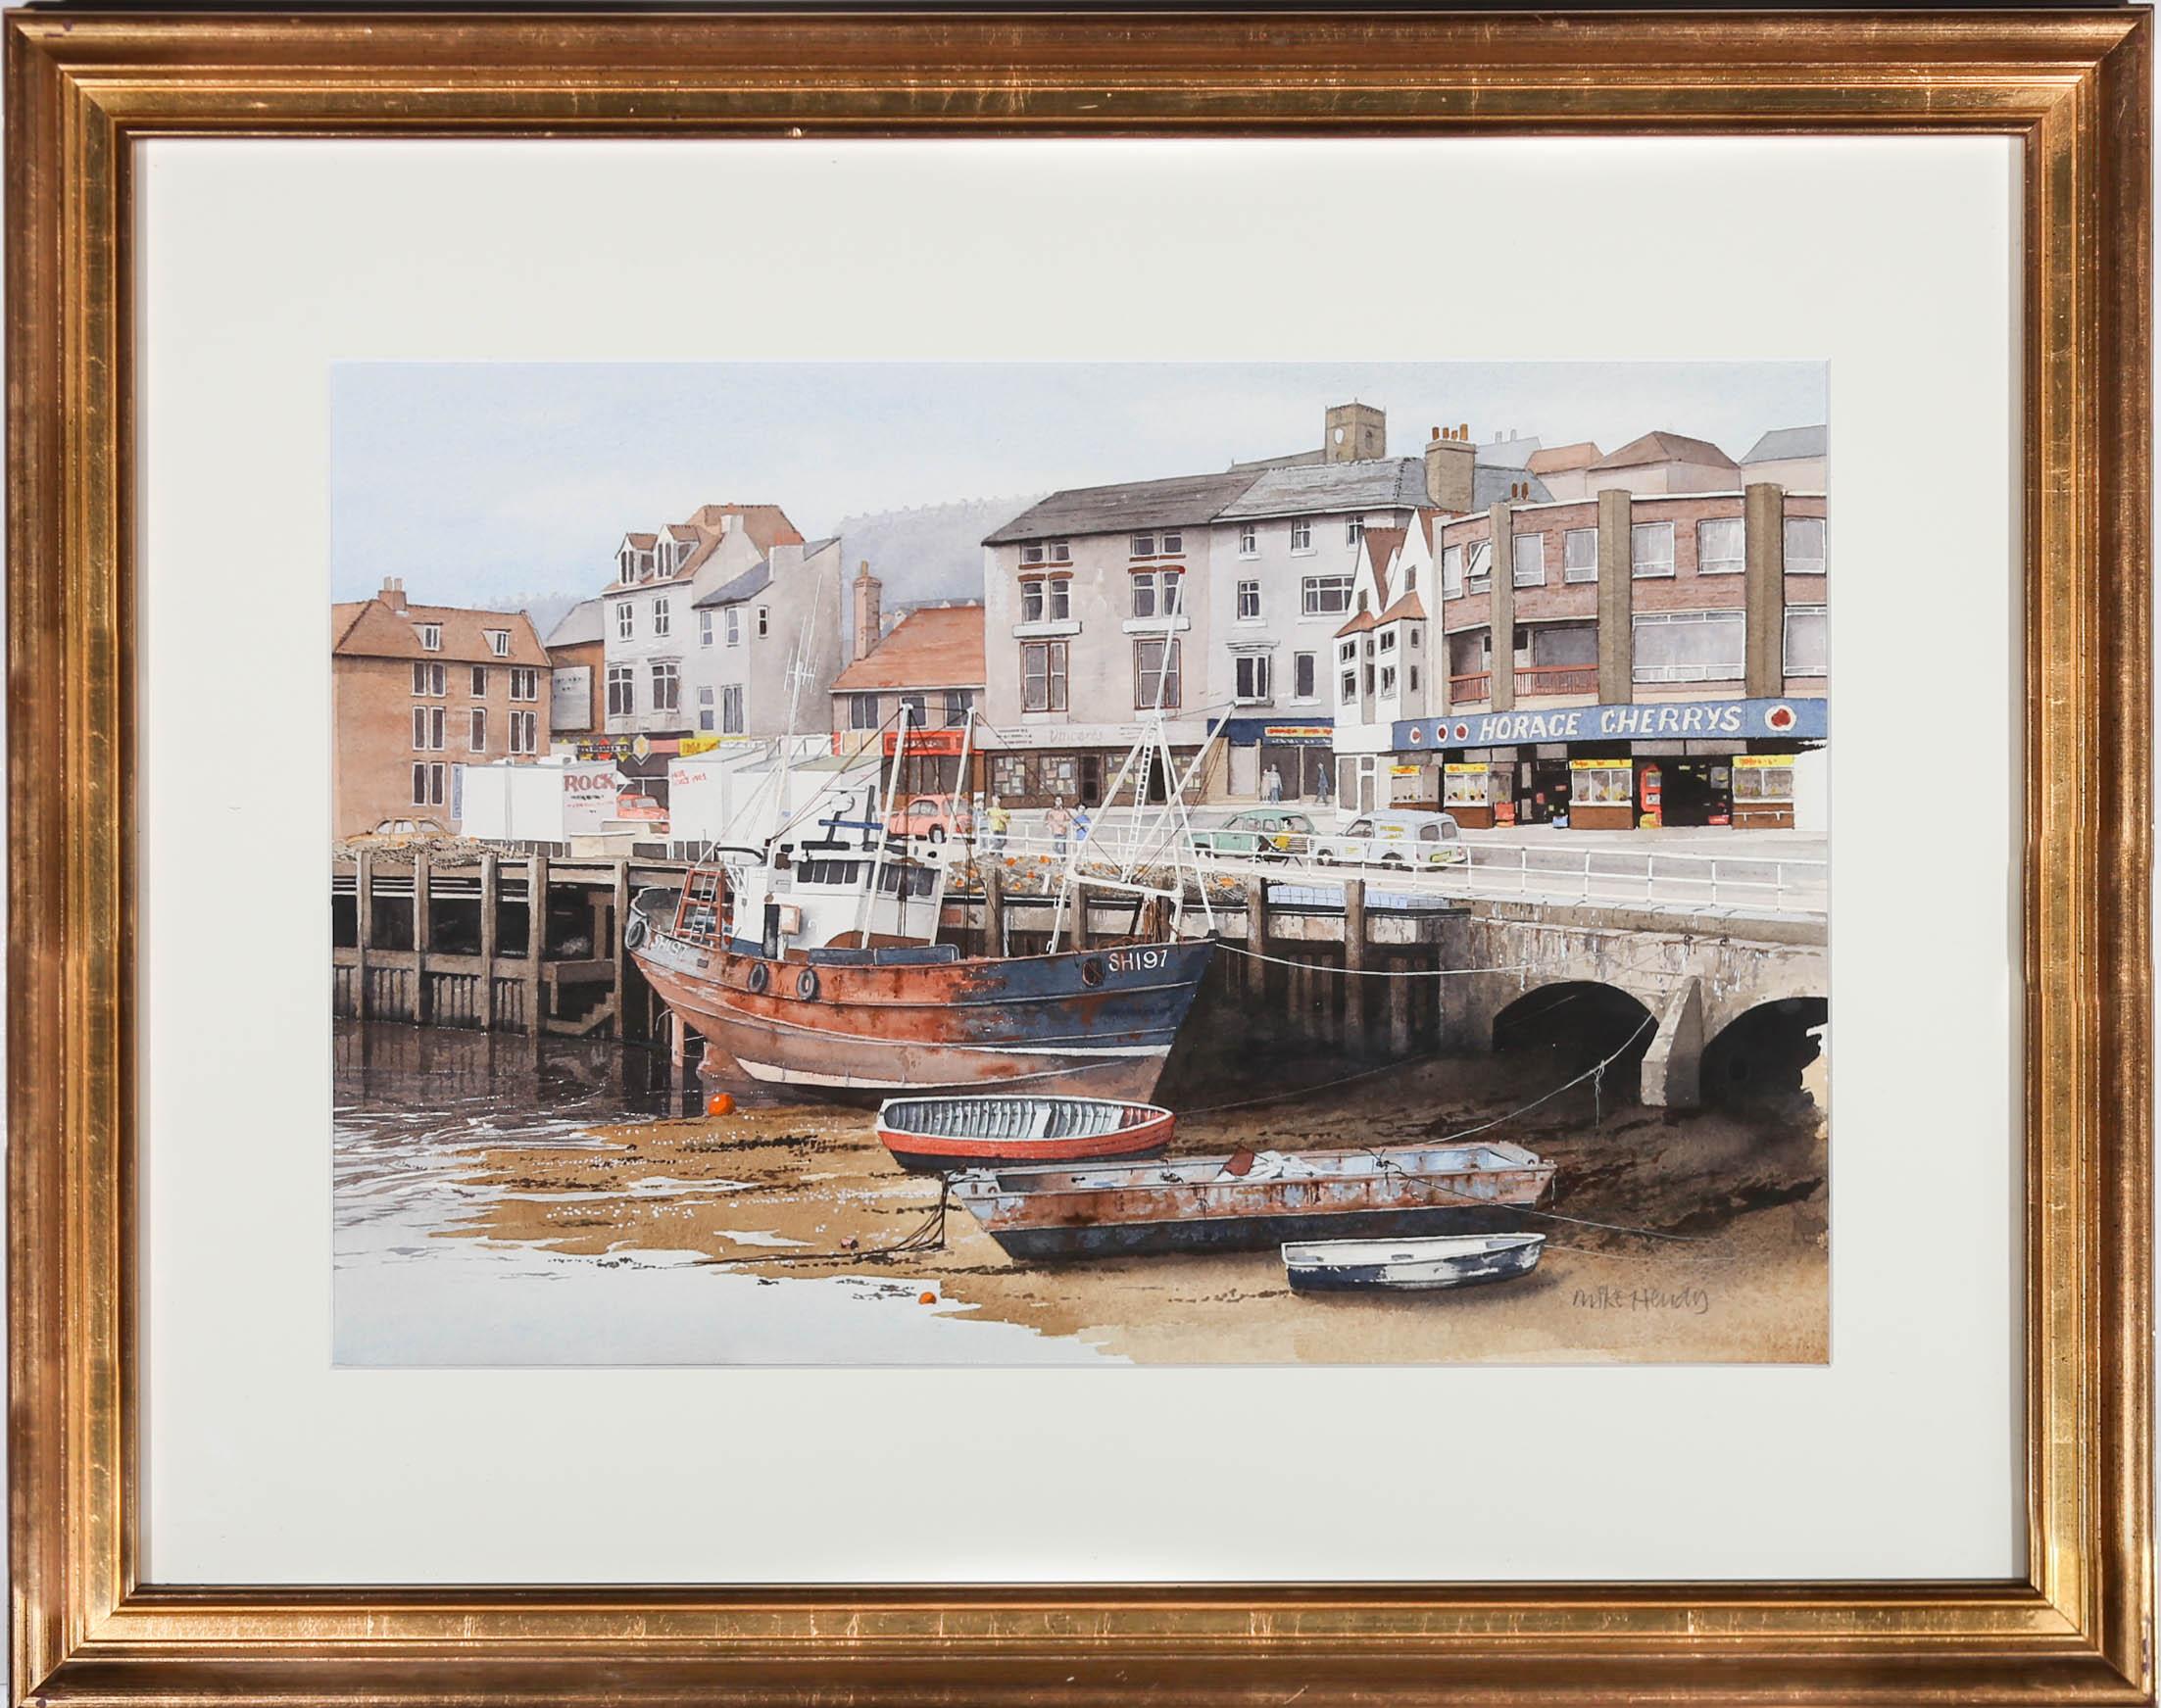 A crisp and accomplished watercolour painting by Mike Hendy, depicting the popular British holiday destination of Scarborough. A large fishing boat captures your attention in the centre of the composition, with Horace Cherrys seaside arcade open on